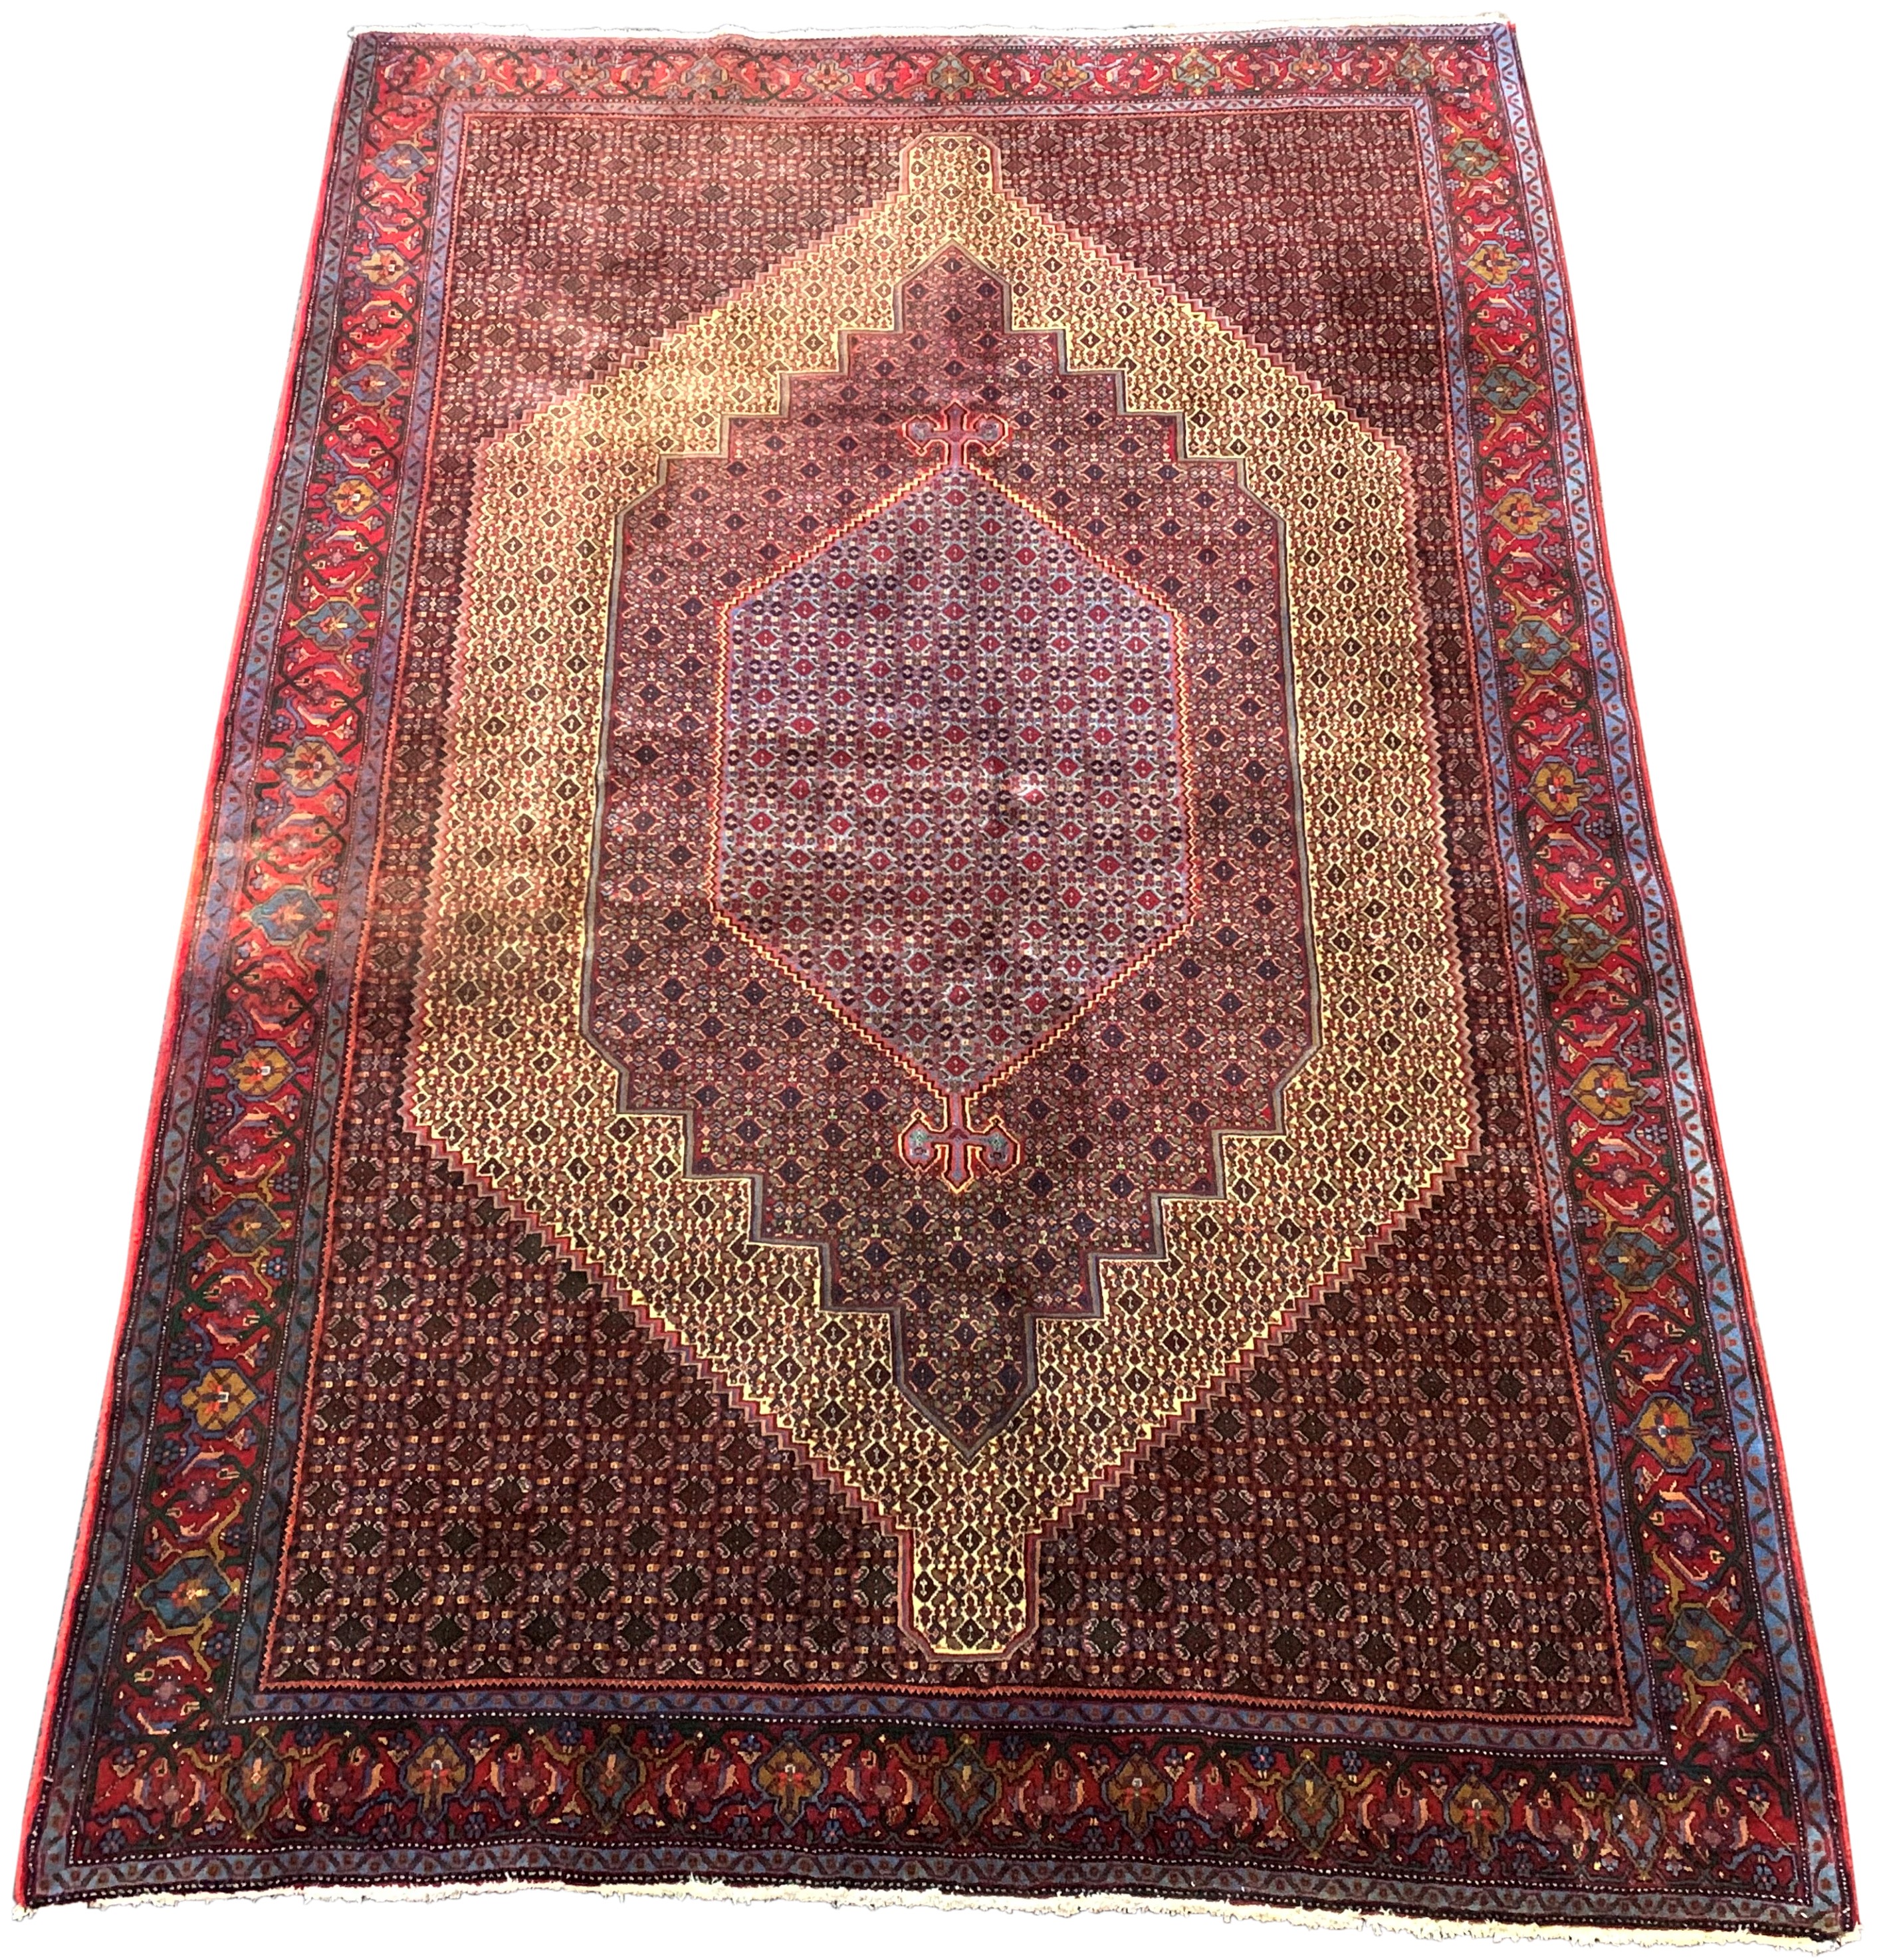 Fine Persian Senneh rug, profusely decorated with Herati motifs, multiple lozenge fields, stylised